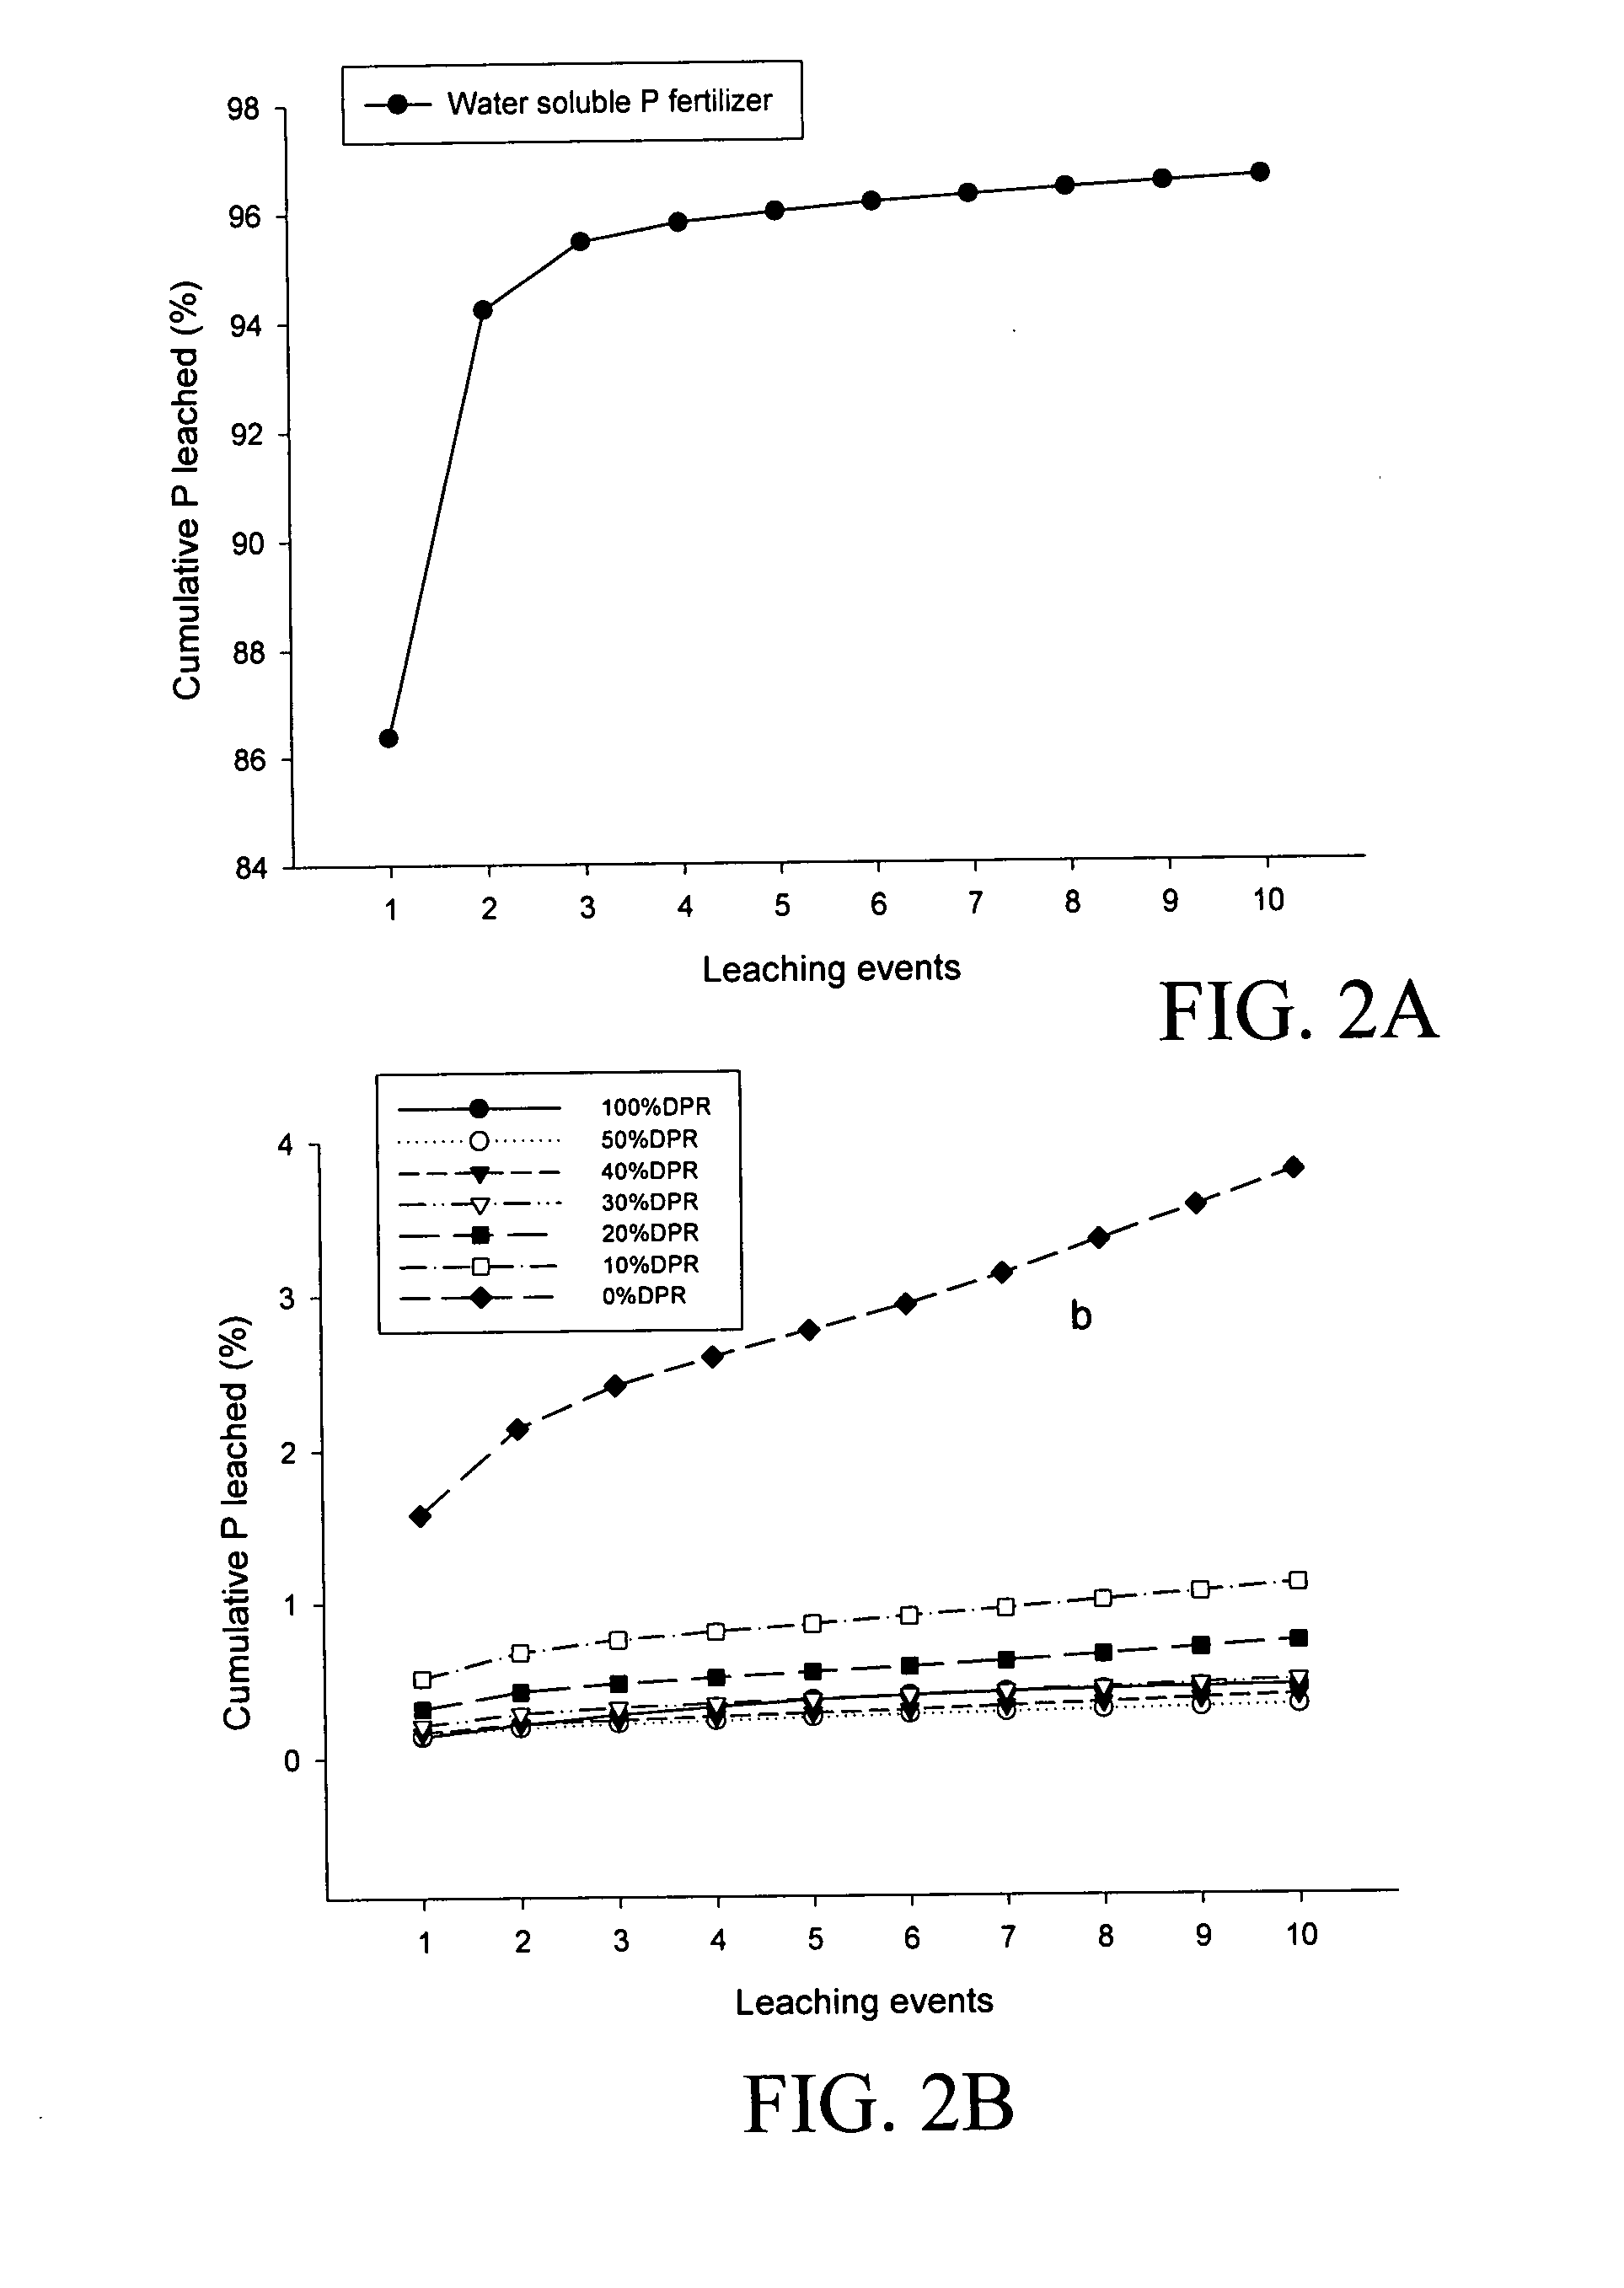 Materials and methods for preparing dolomite phosphate rock-based soil amendments and fertilizers